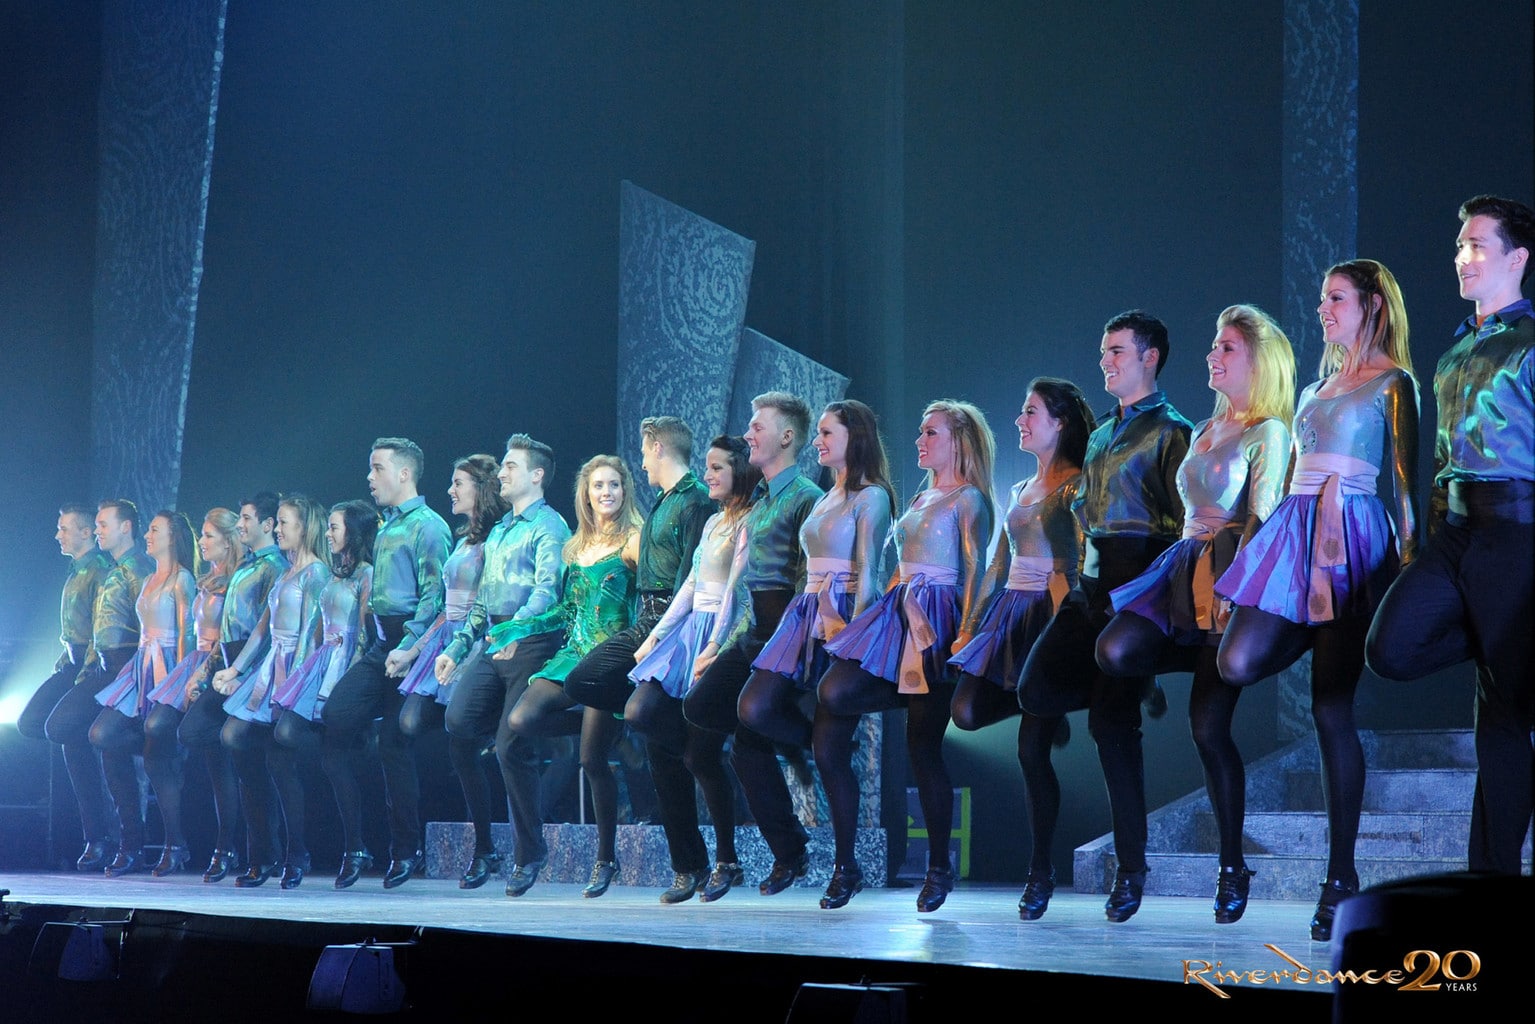 Riverdance Will Wow and Amaze